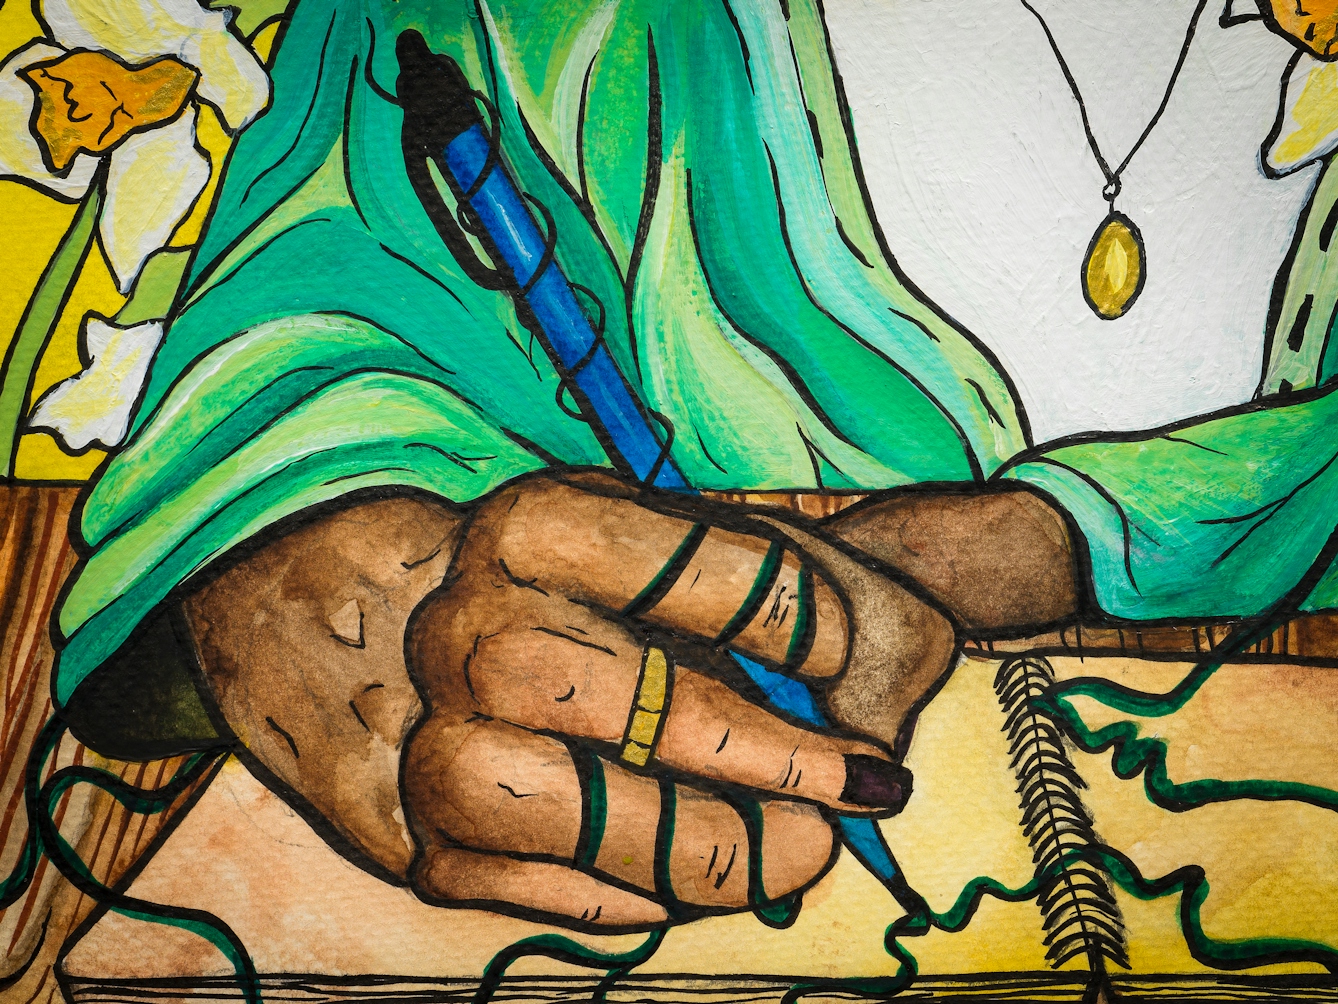 Detail from a larger colourful artwork. The artwork shows a person writing in a spiral-bound notebook. They are wearing a green cardigan with a necklace and are holding a pen in their right hand. Their nails are painted and are wearing a ring. From the pen nib, vines extend across the notebook pages, wrapping around the person's hand and over onto the wooden table they are sat at. 